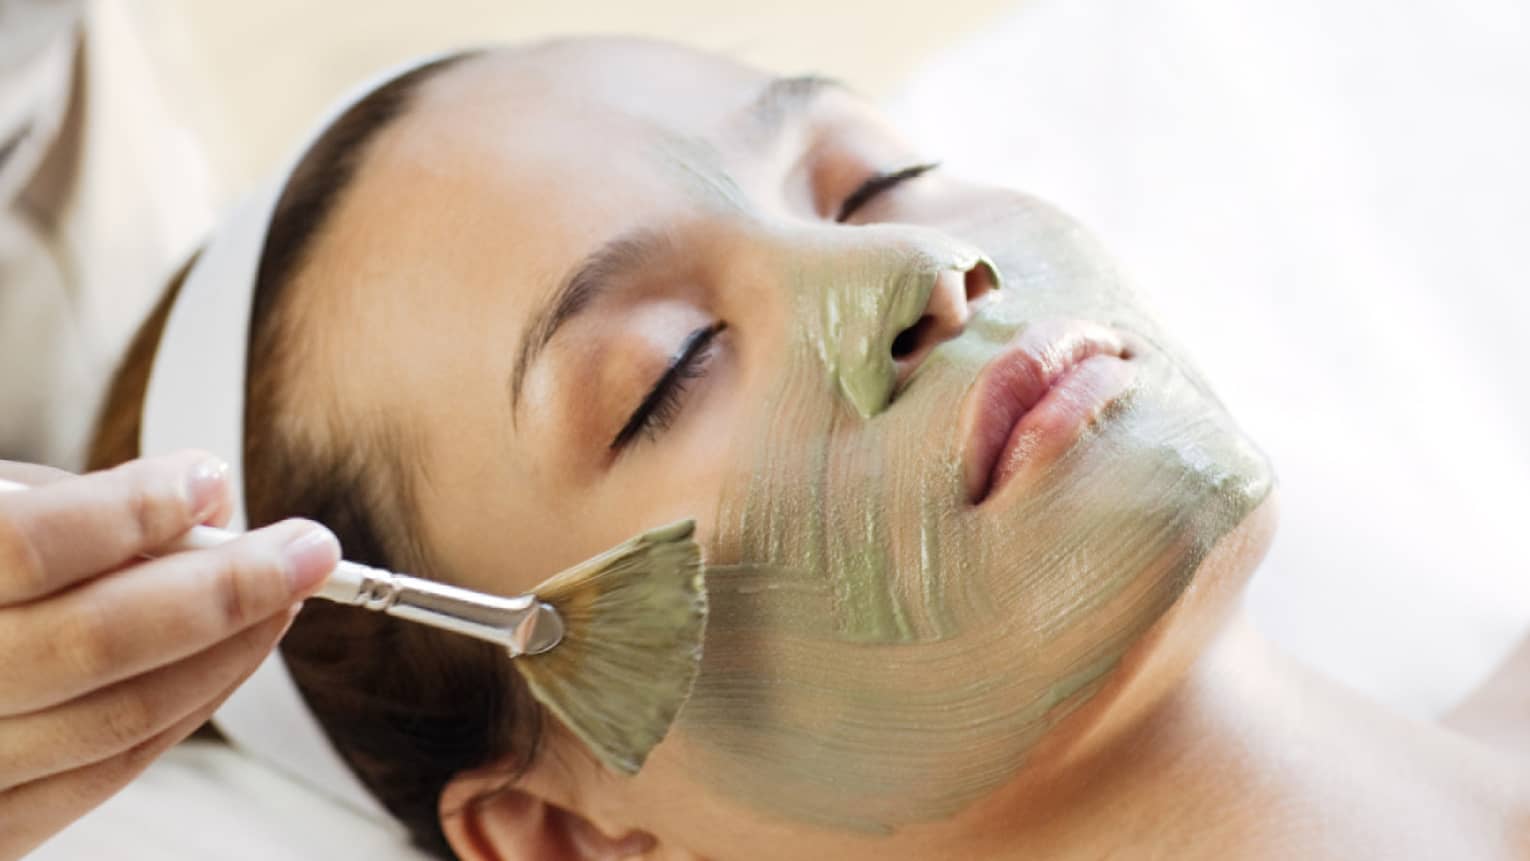 Spa staff holding brush paints green mask on woman's cheeks, chin, nose 